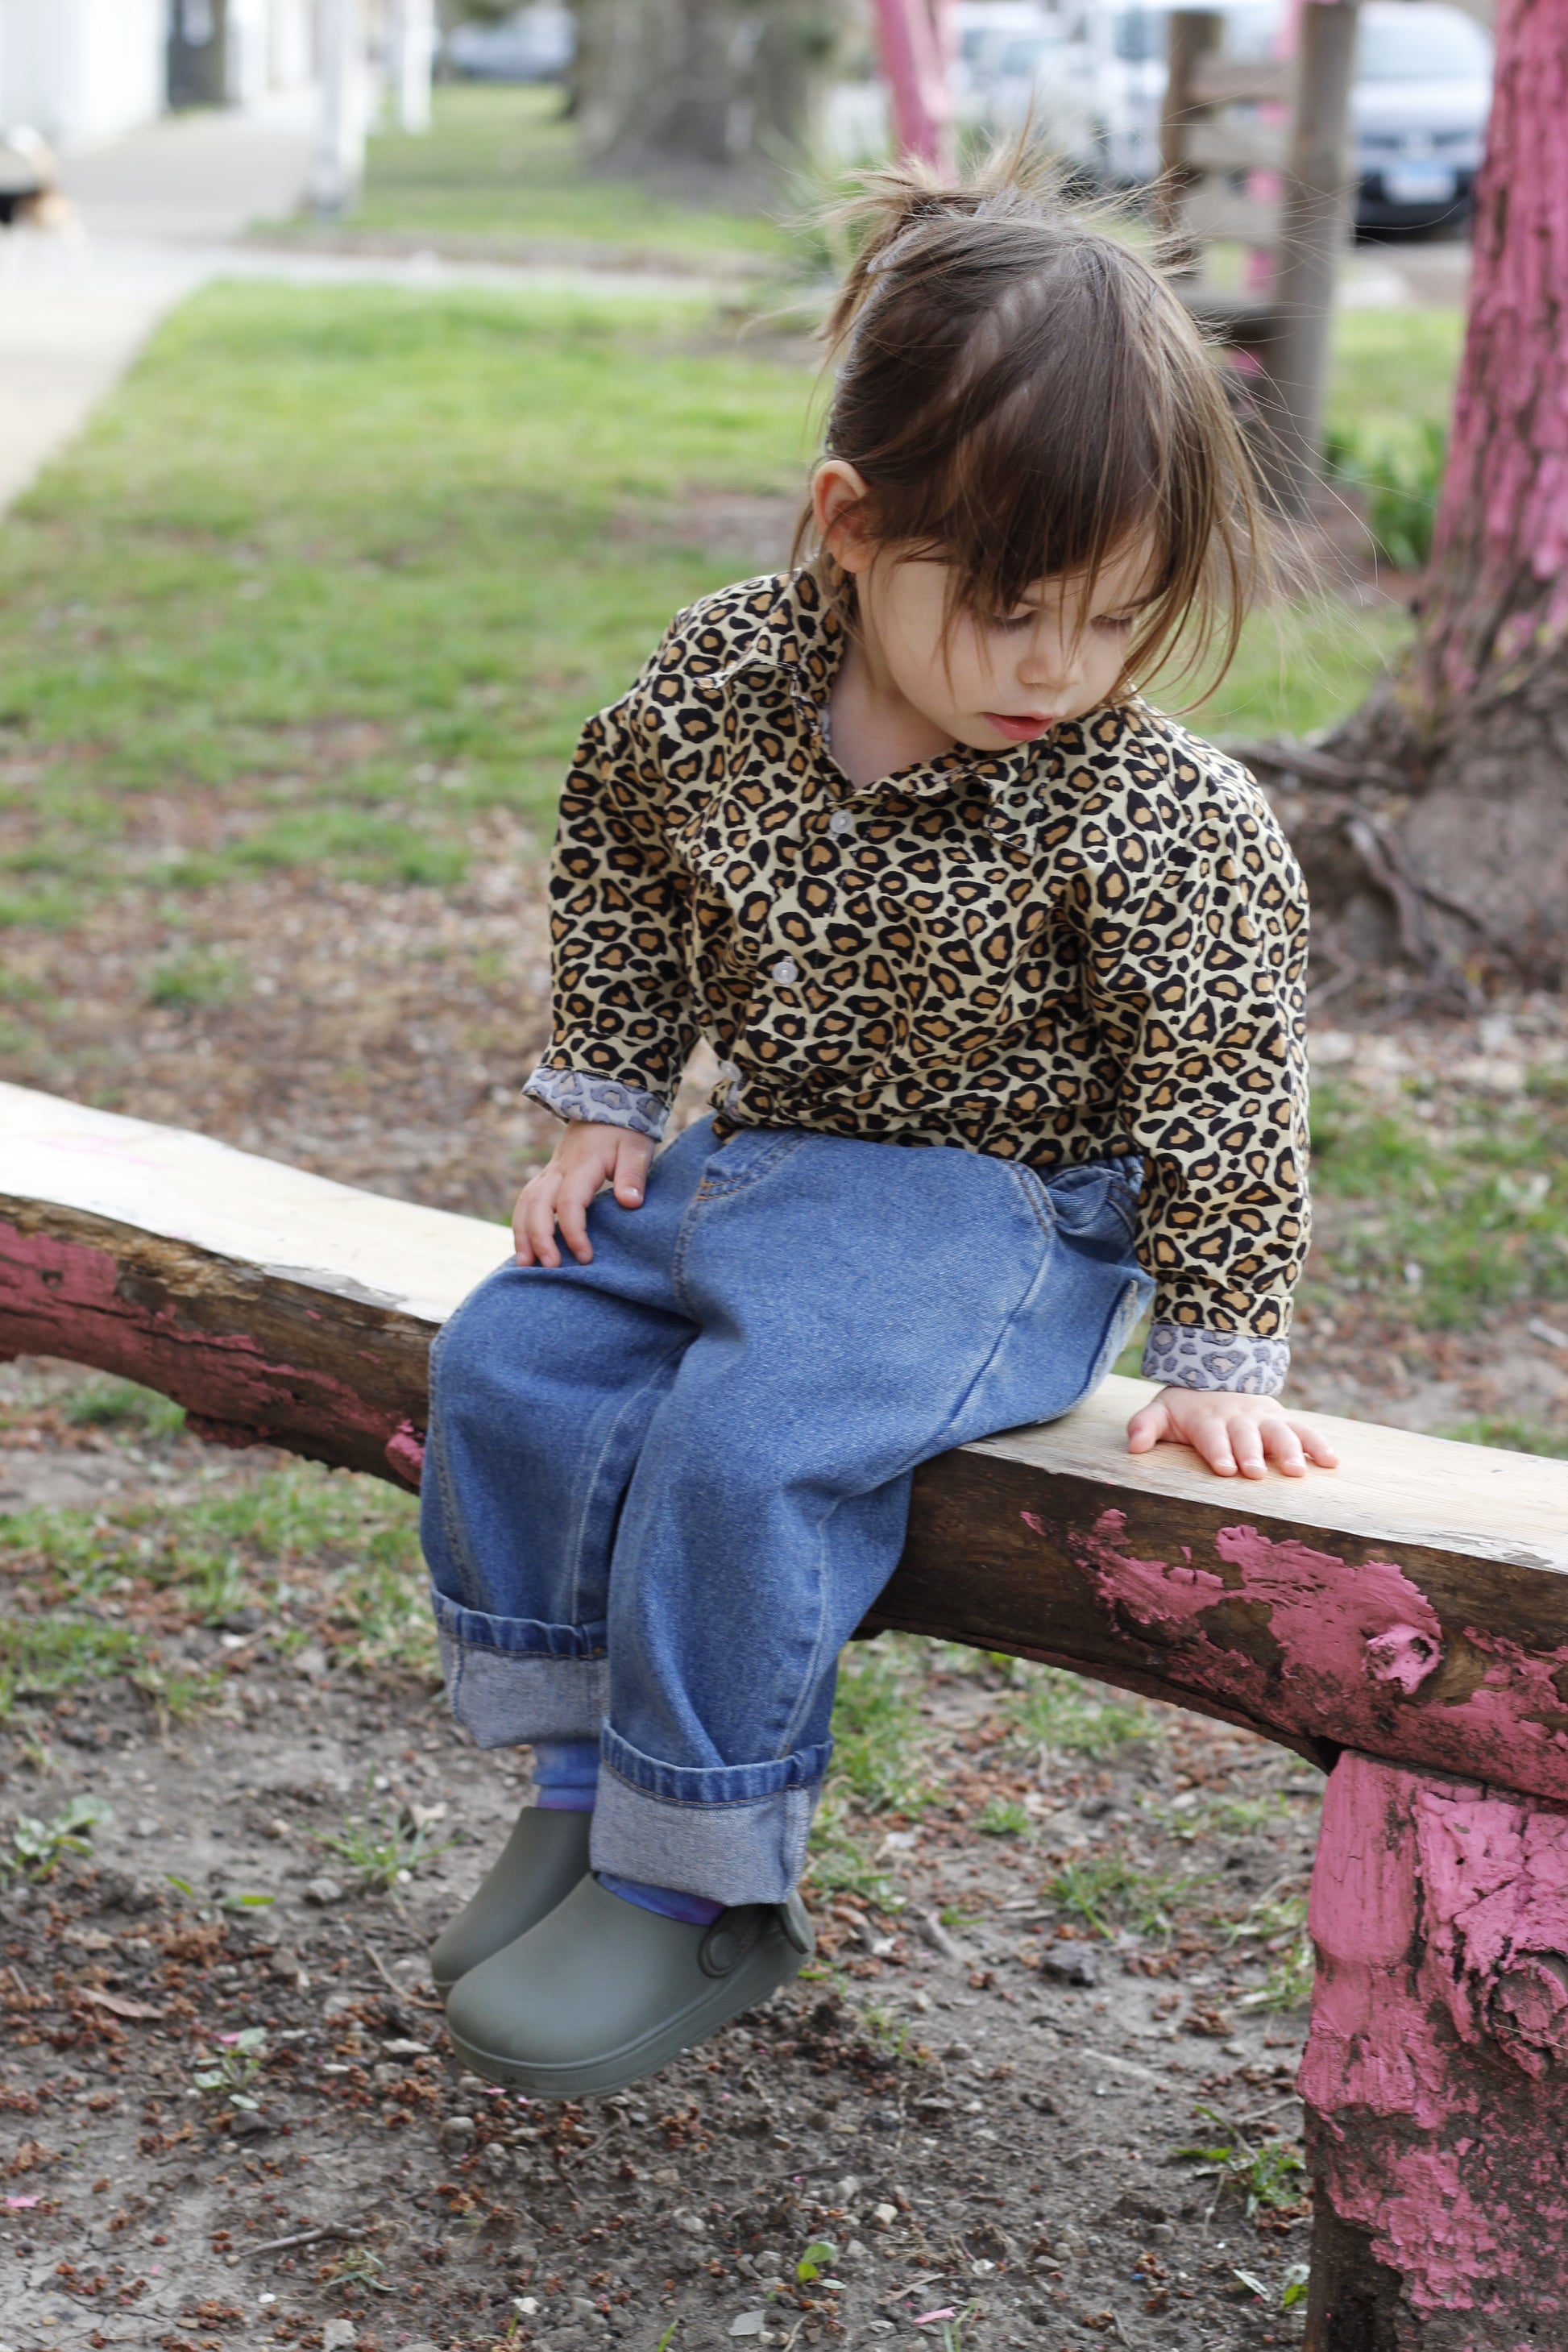 young child wears leopard print shirt and kids peekaboo pocket denim blue jeans pants trousers bottoms detailed pocket leg seam detail elastic waist stretchy back pockets sitting on pink wood bench